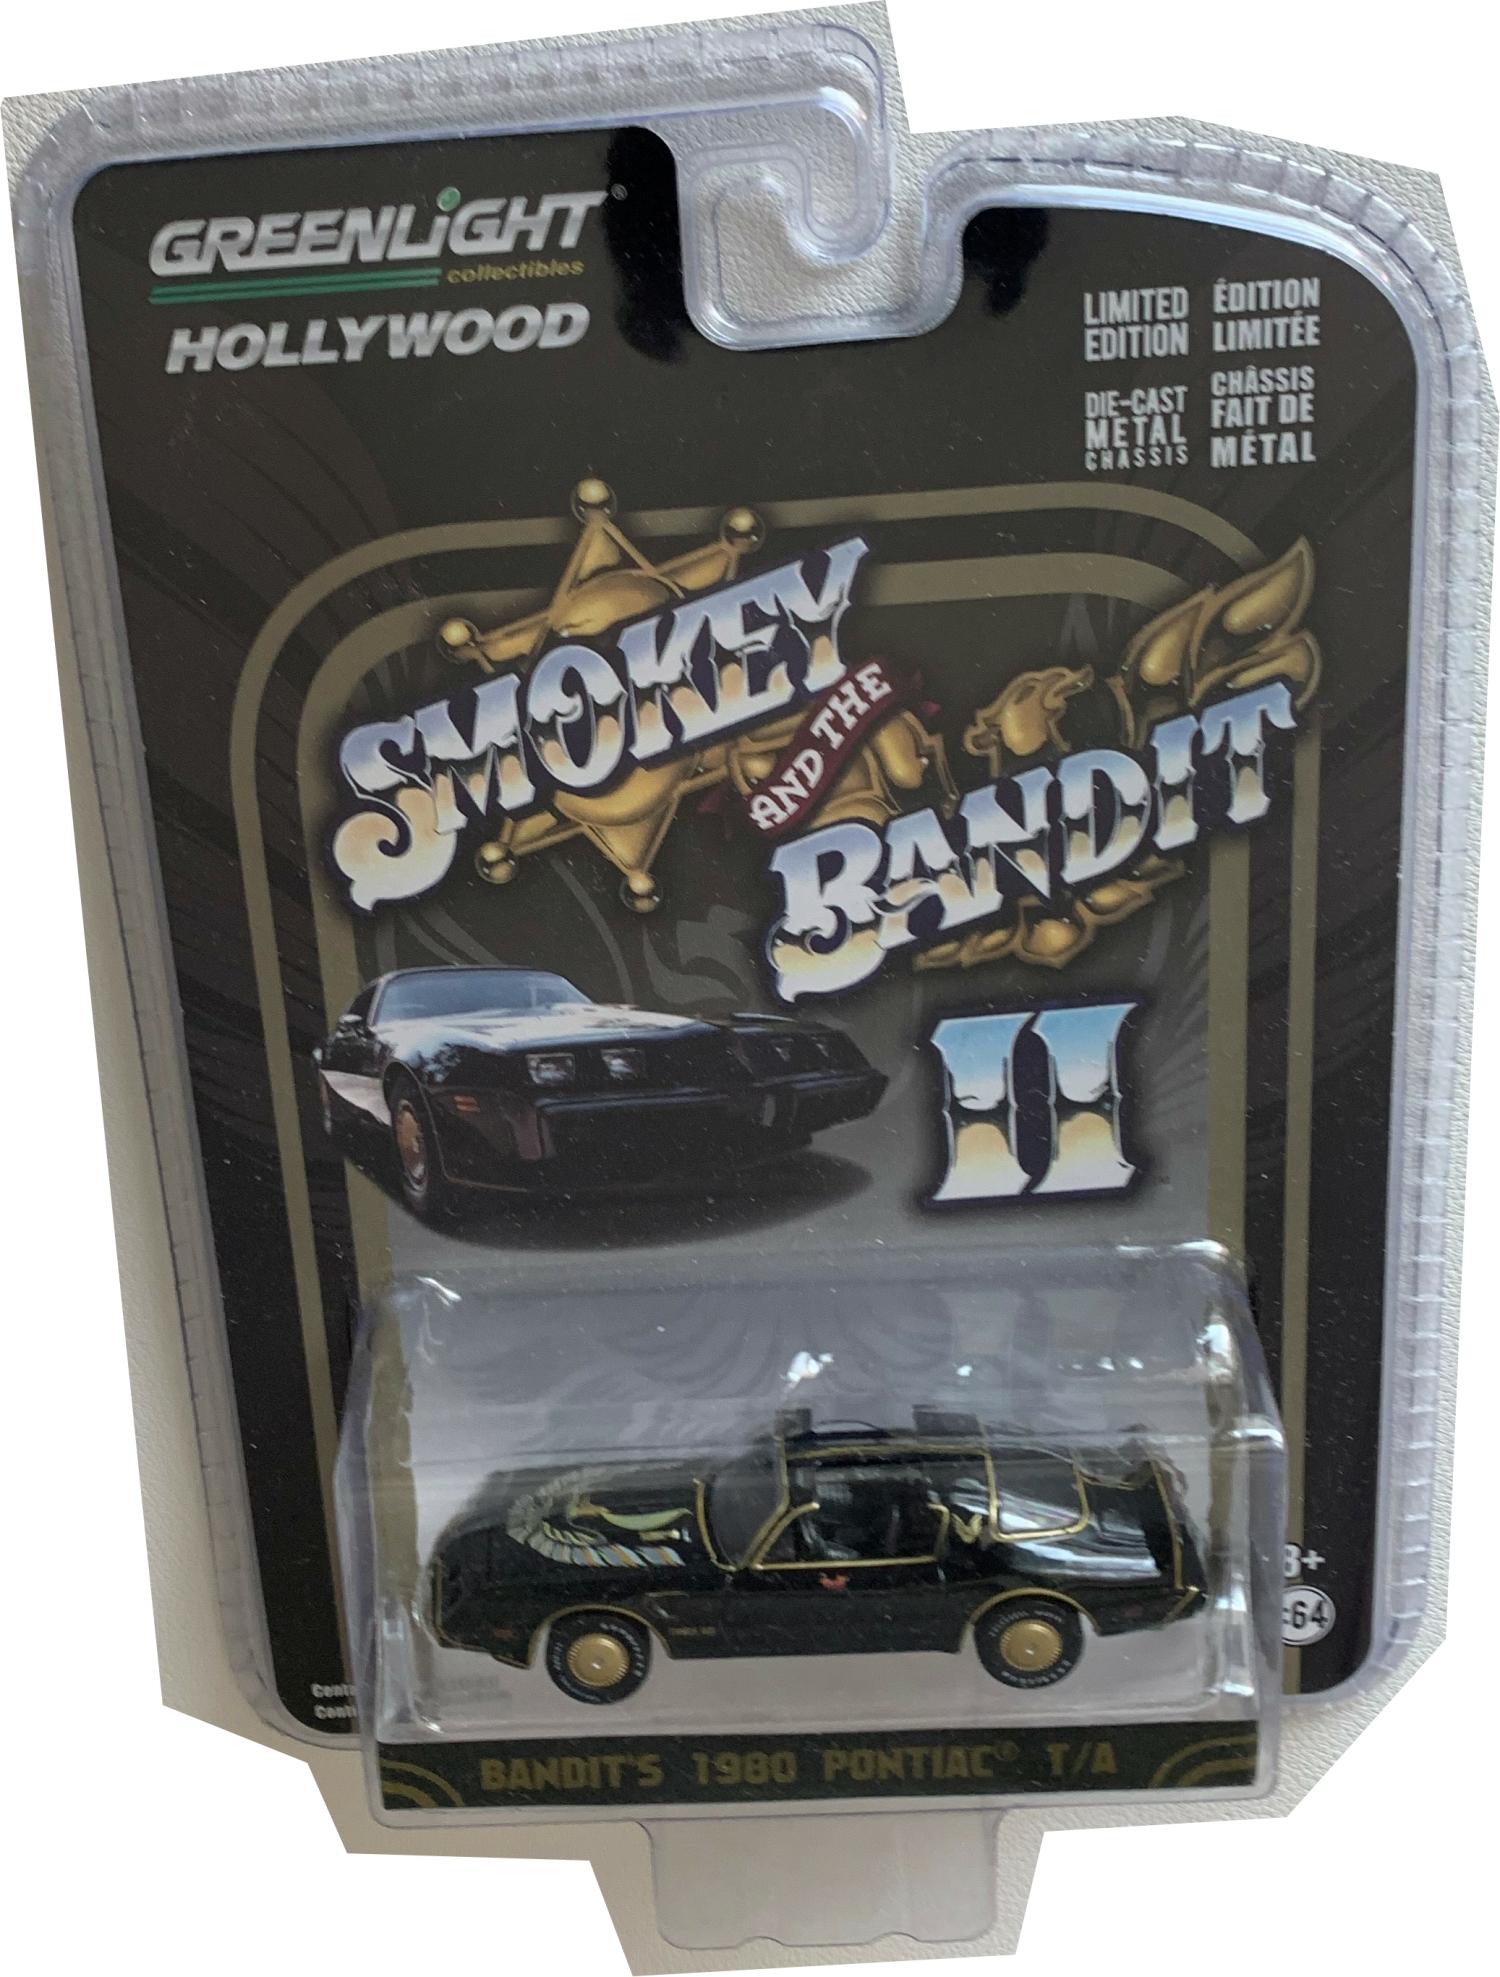 Smokey and the Bandit II 1980 Pontiac Trans Am in black 1:64 scale